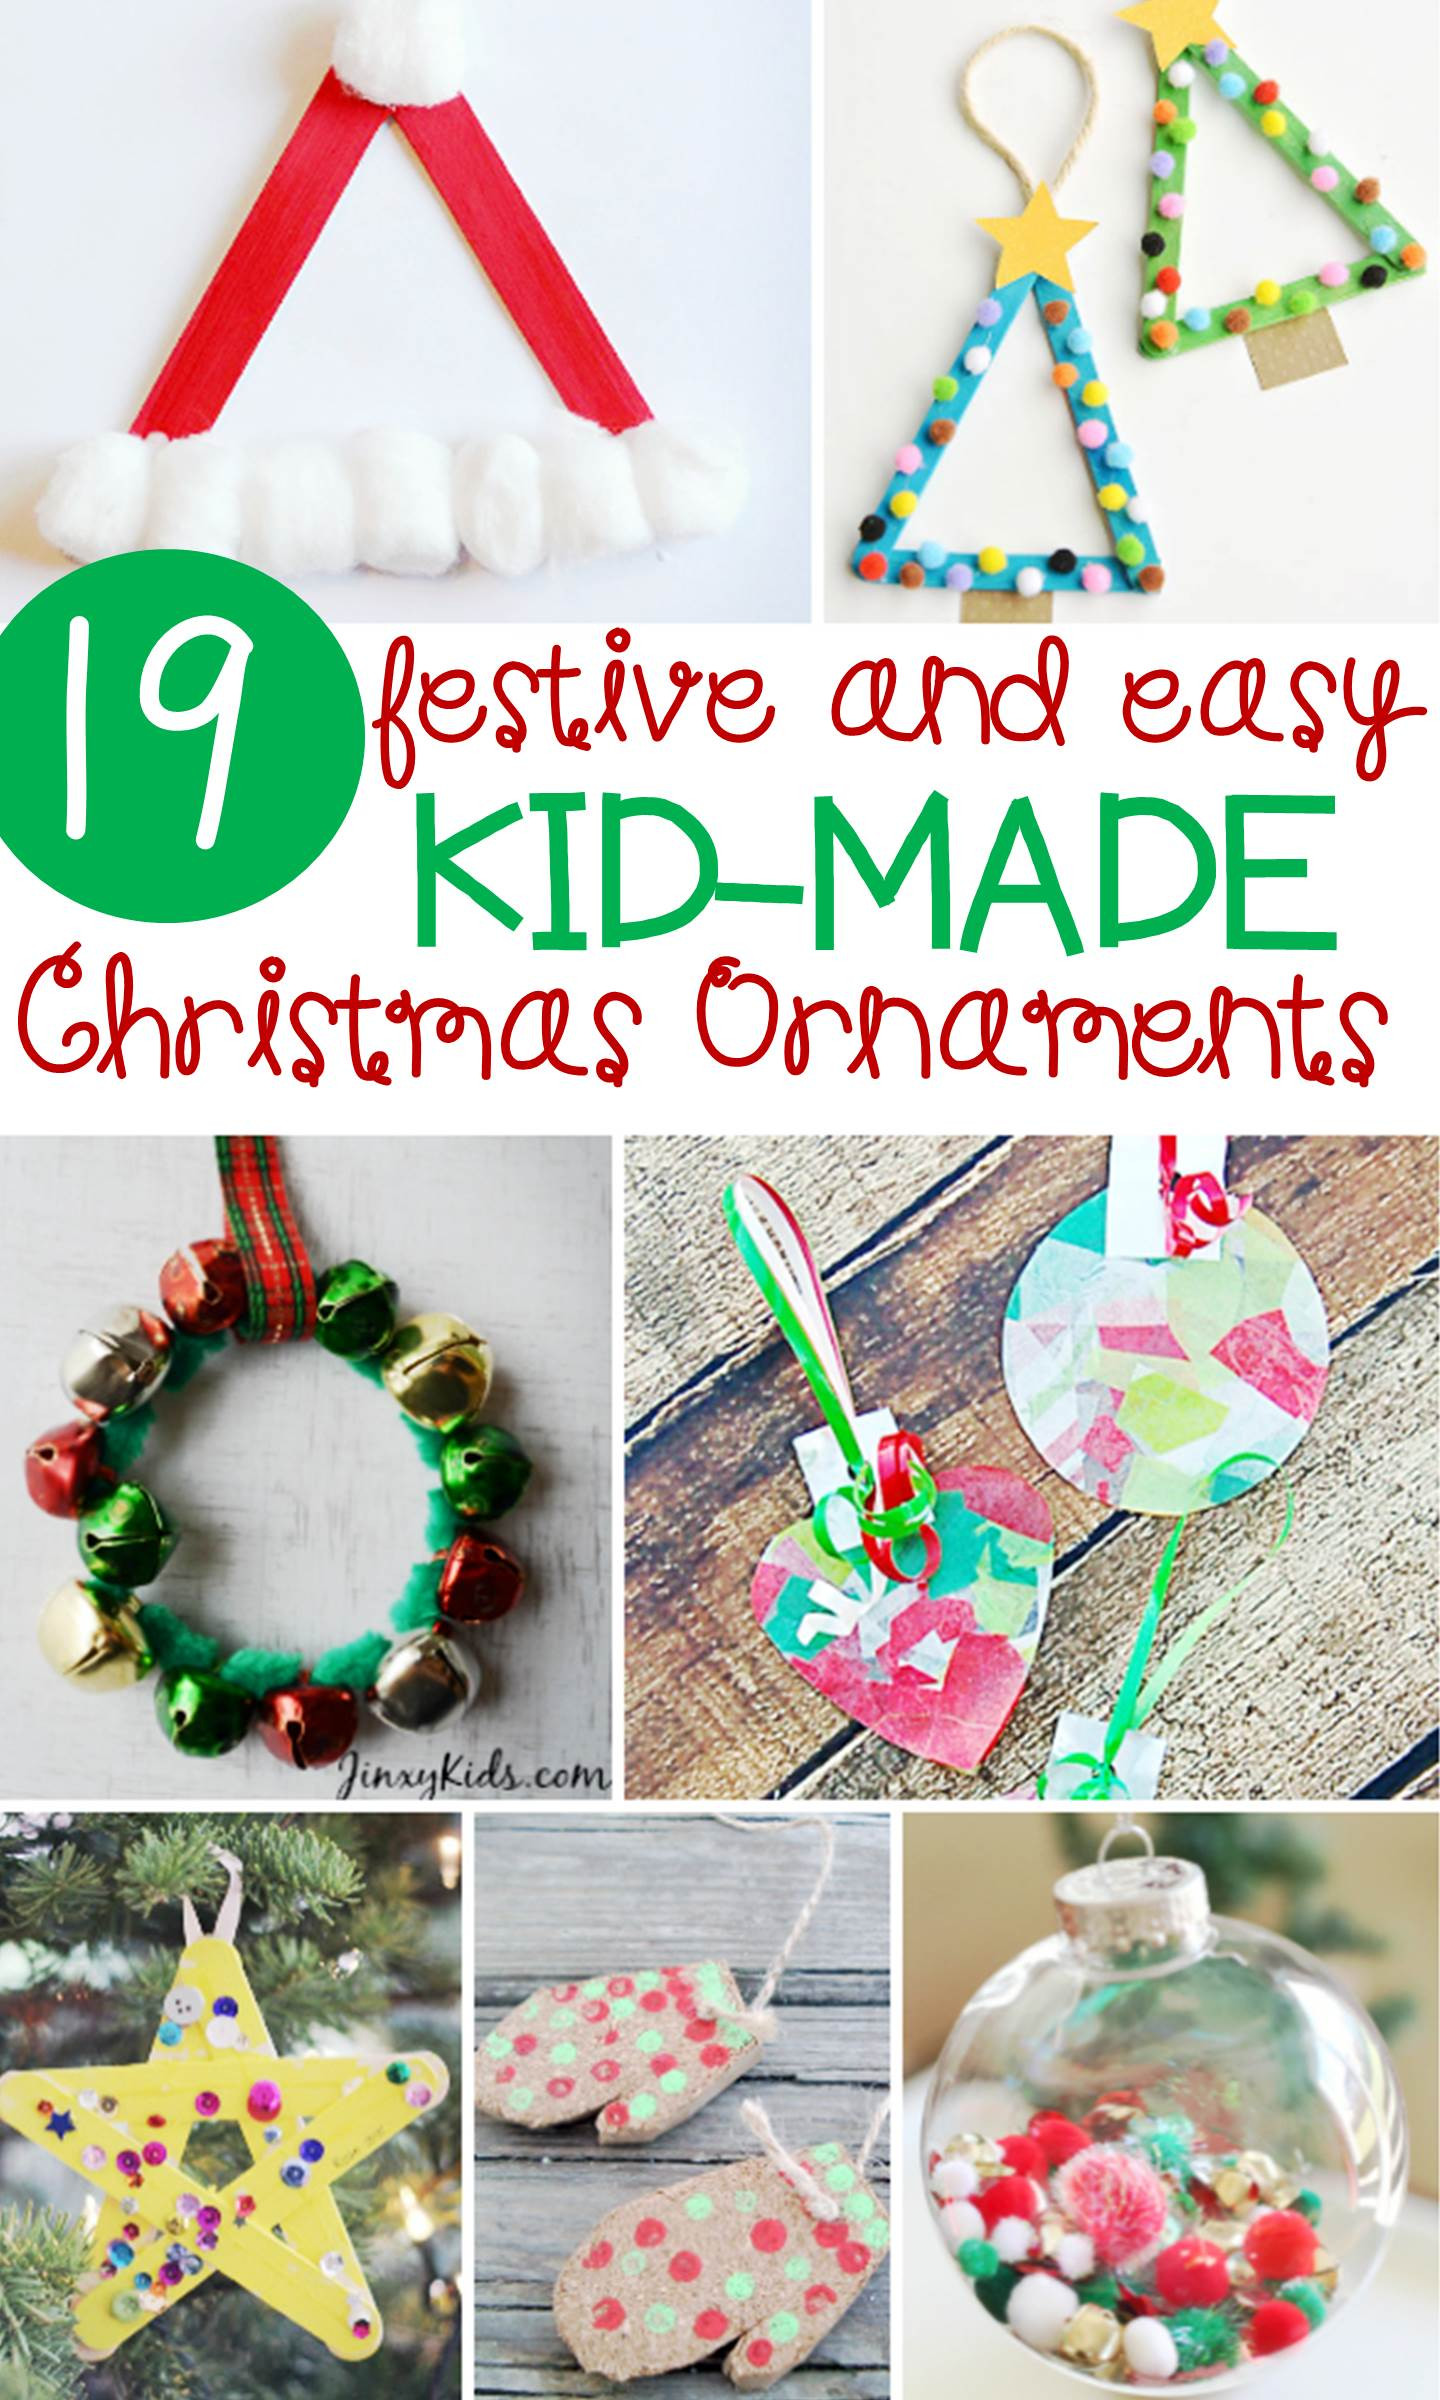 Christmas Crafts For Kids Pinterest
 Festive and Simple Kids Christmas Ornaments The